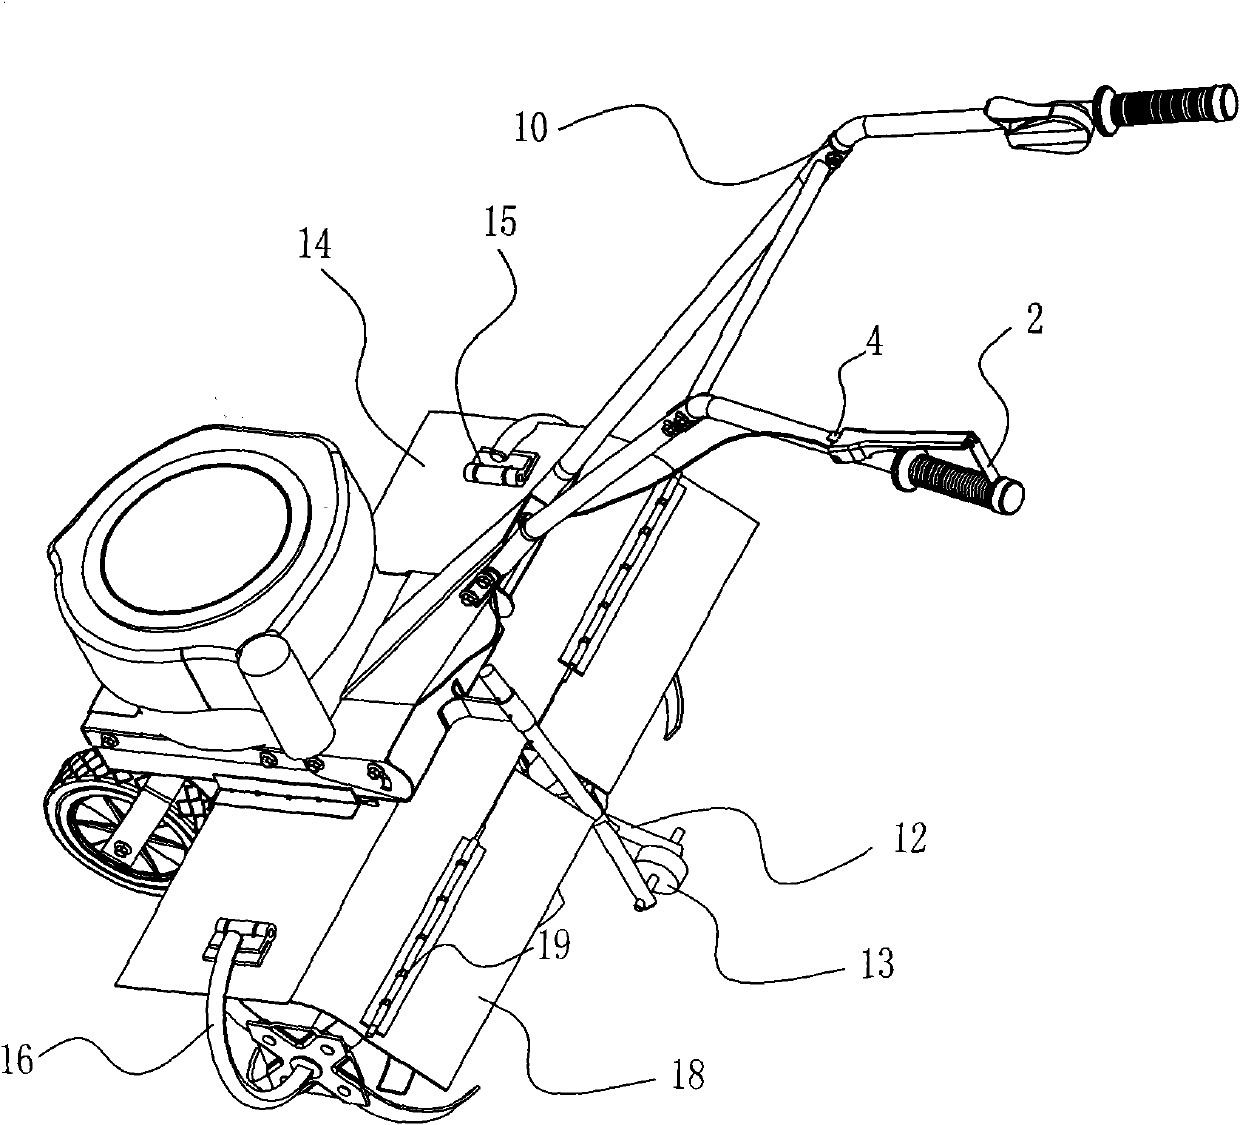 Rotary cultivator with multiple safety measures